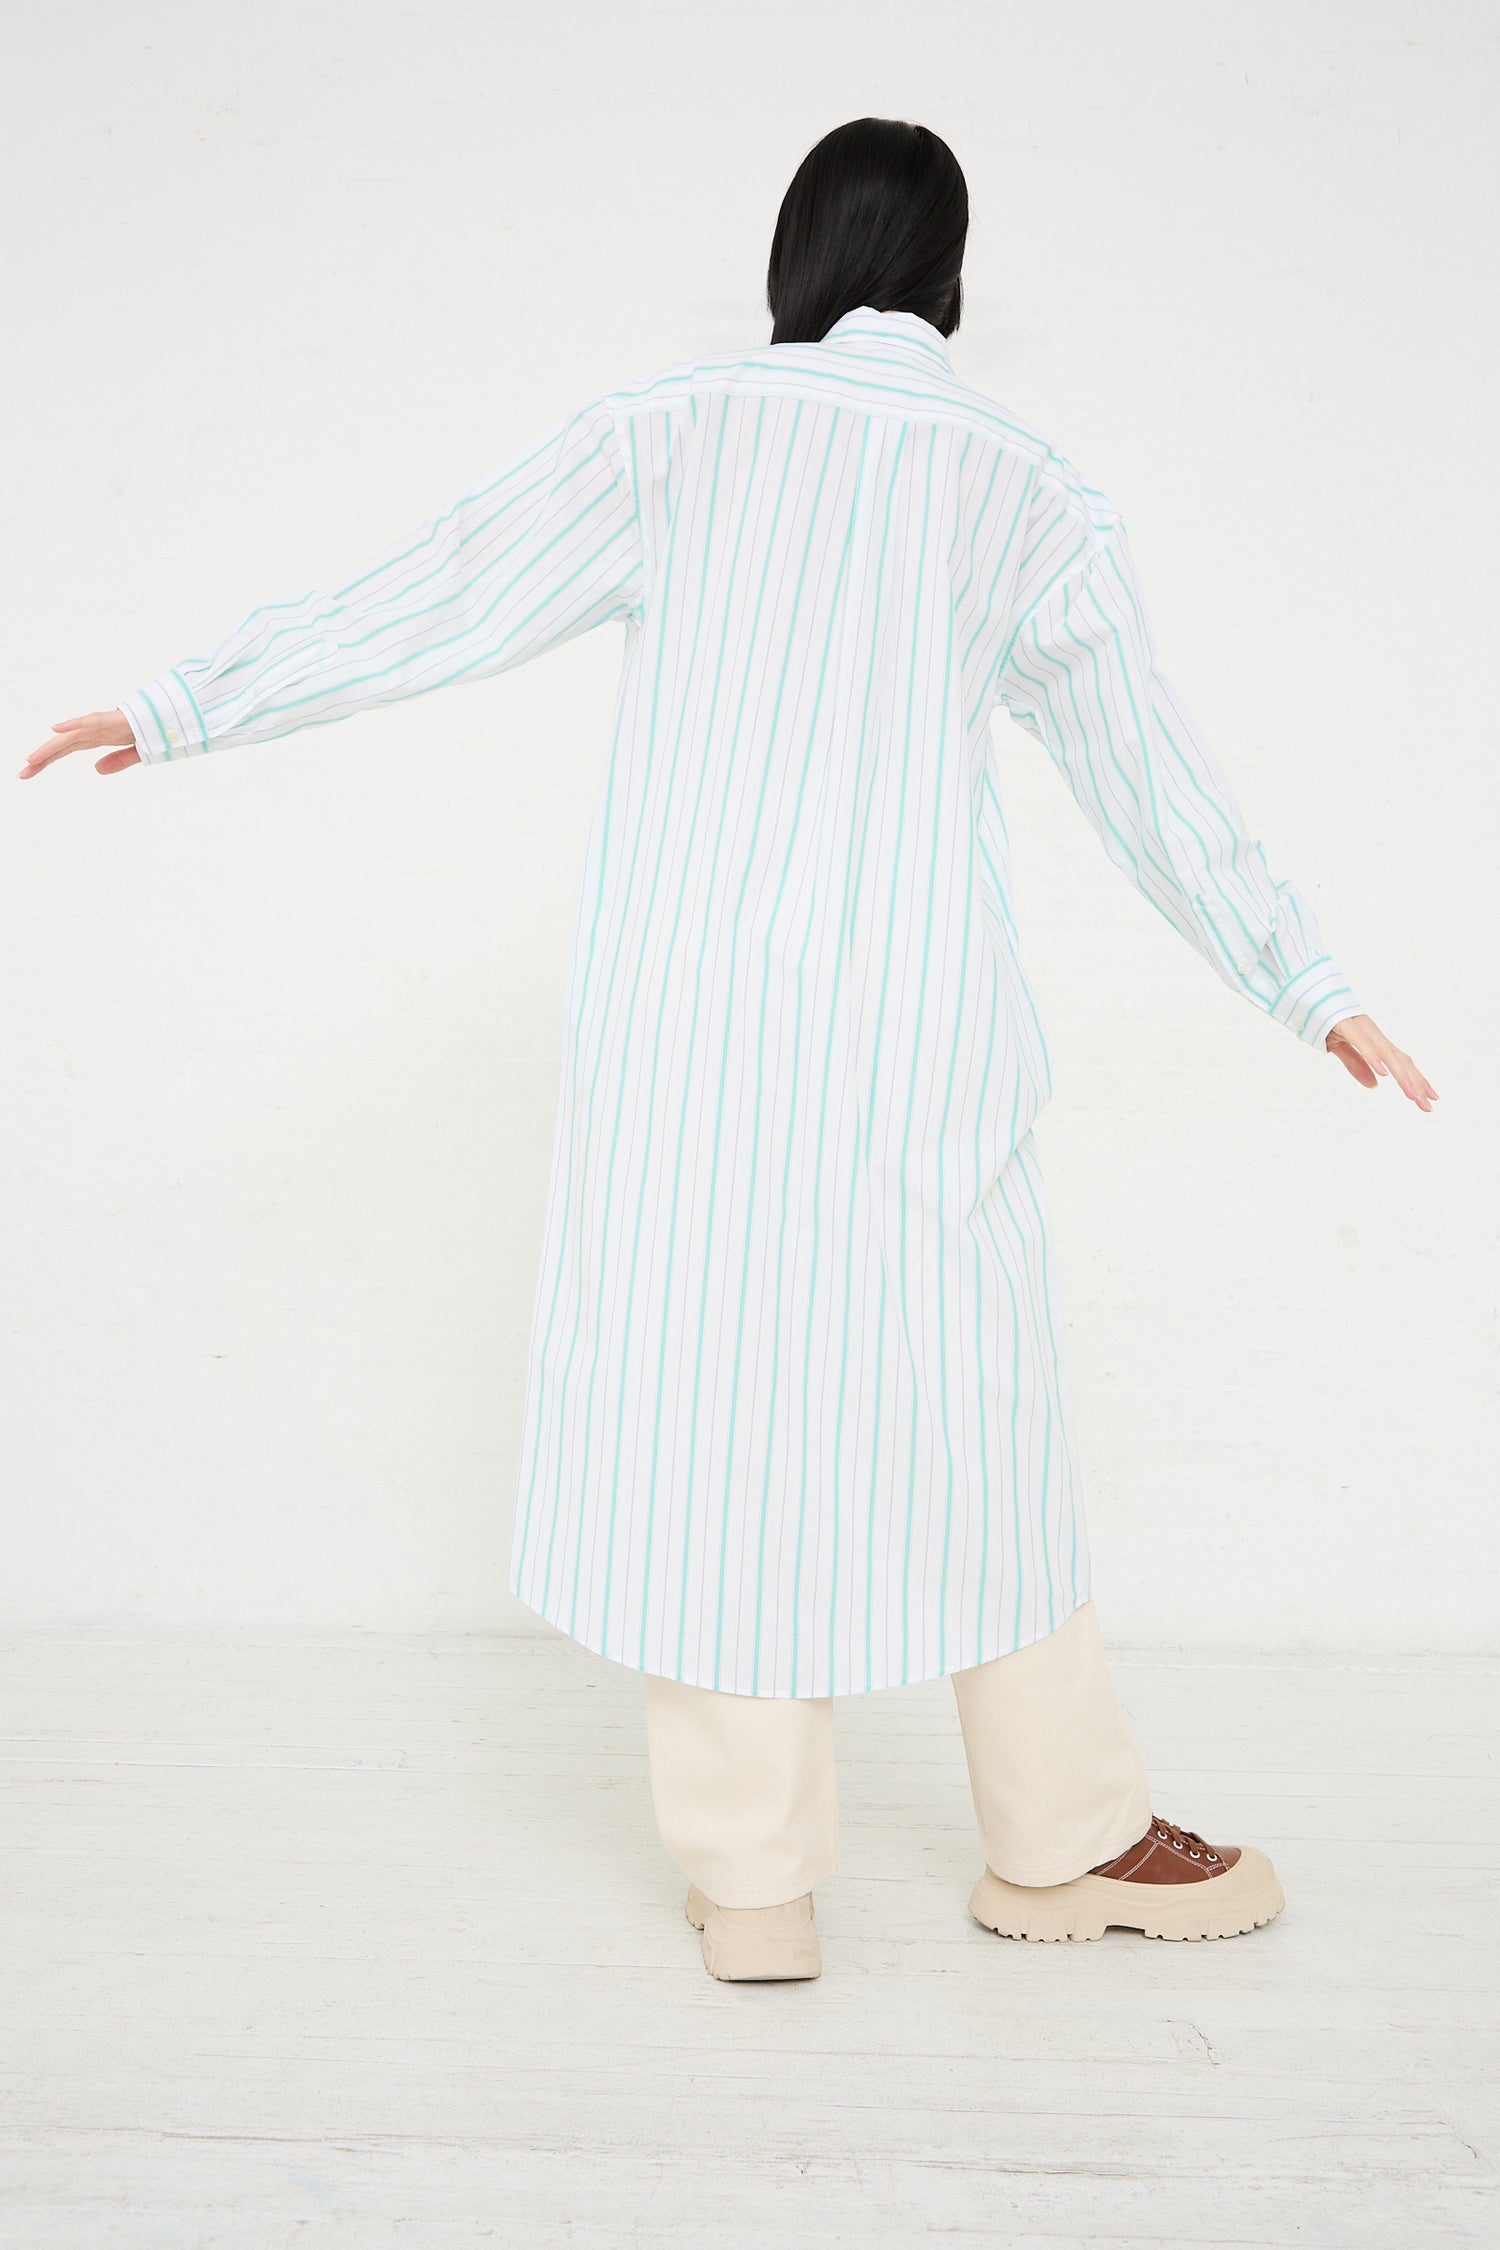 A person viewed from behind, wearing a Baserange Organic Cotton Ole Shirt Dress in Stripe and cream pants, with arms outstretched, standing against a white background.